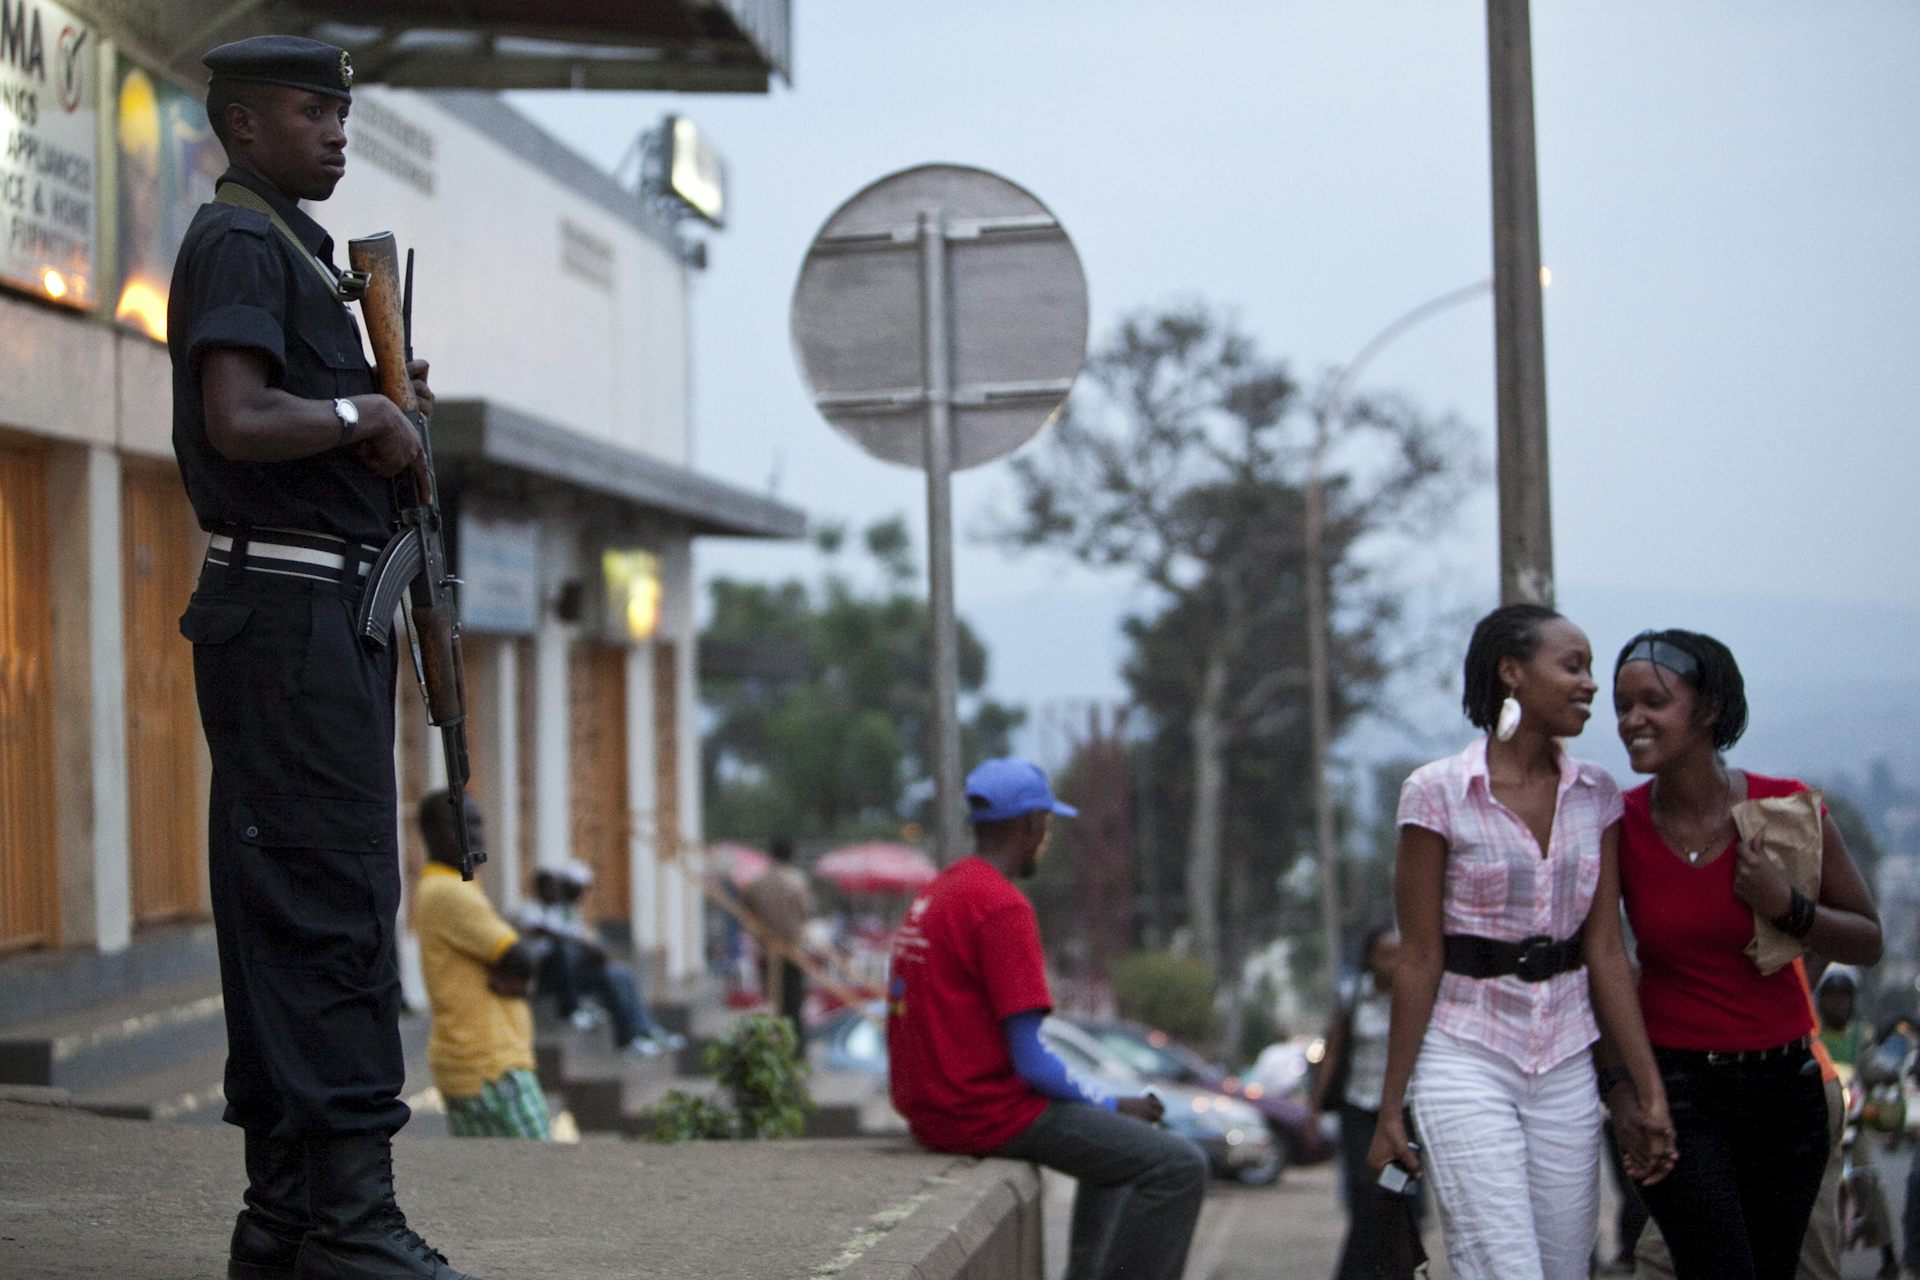 Rwanda’s Economic Growth Could Be Derailed by Its Autocratic Regime